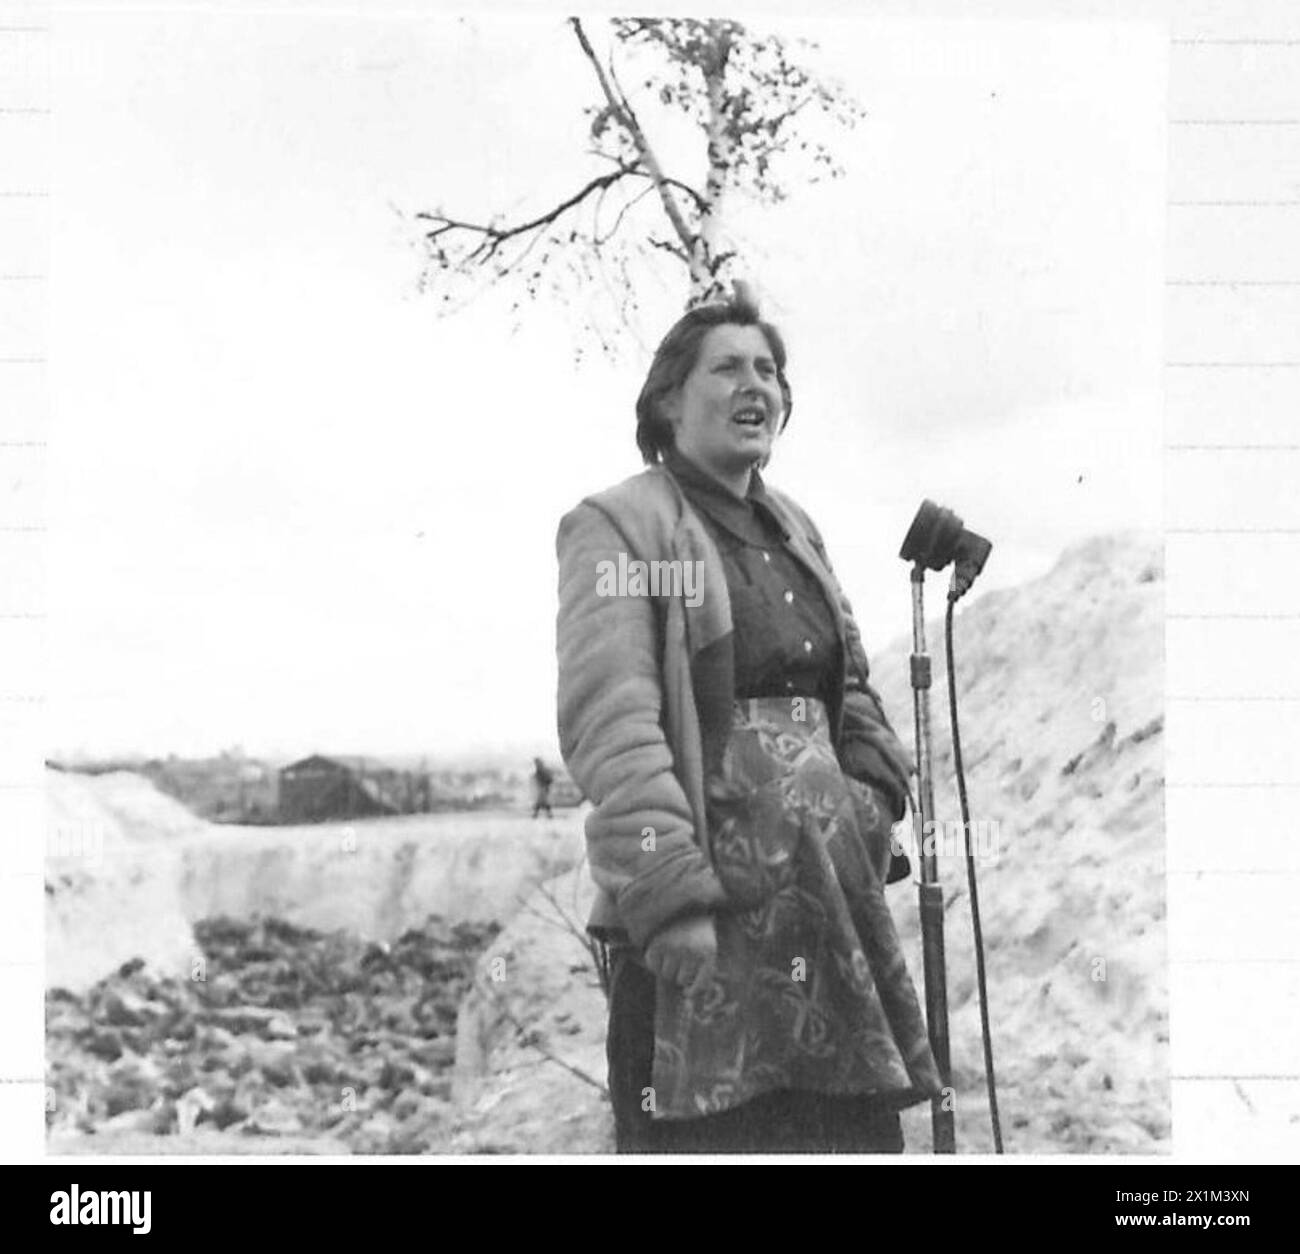 THE LIBERATION OF BERGEN-BELSEN CONCENTRATION CAMP, APRIL 1945 - Hela Goldstein, a Polish inmate, speaking for the Movietone News about her suffering - being born in a Jewish family, which meant four years in concentration camps, 21 April 1945.Born in Tuszyn in central Poland, she was in Łódź (Litzmannstadt) Ghetto, Auschwitz and Bergen-Belsen camps (in Belsen only for two weeks before British troops arrived). A mass grave full of dead inmates can be seen in the background, Goldstein, Helena Stock Photo